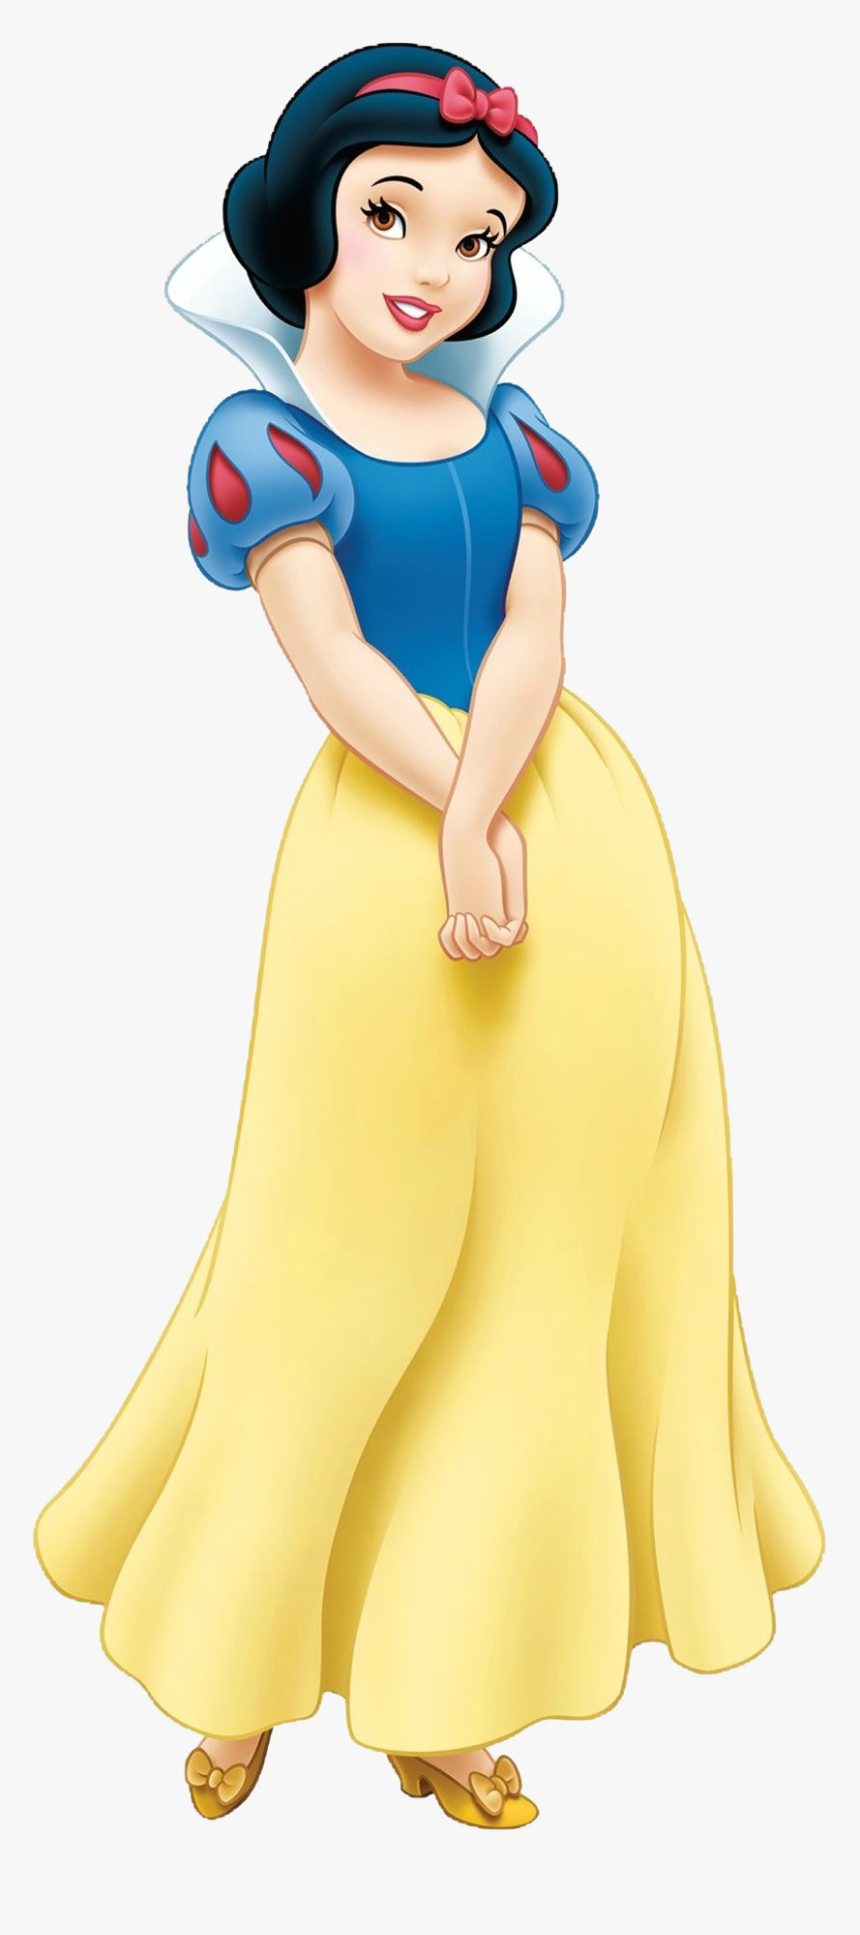 Snow White Png - Snow White, Transparent Png, Free Download